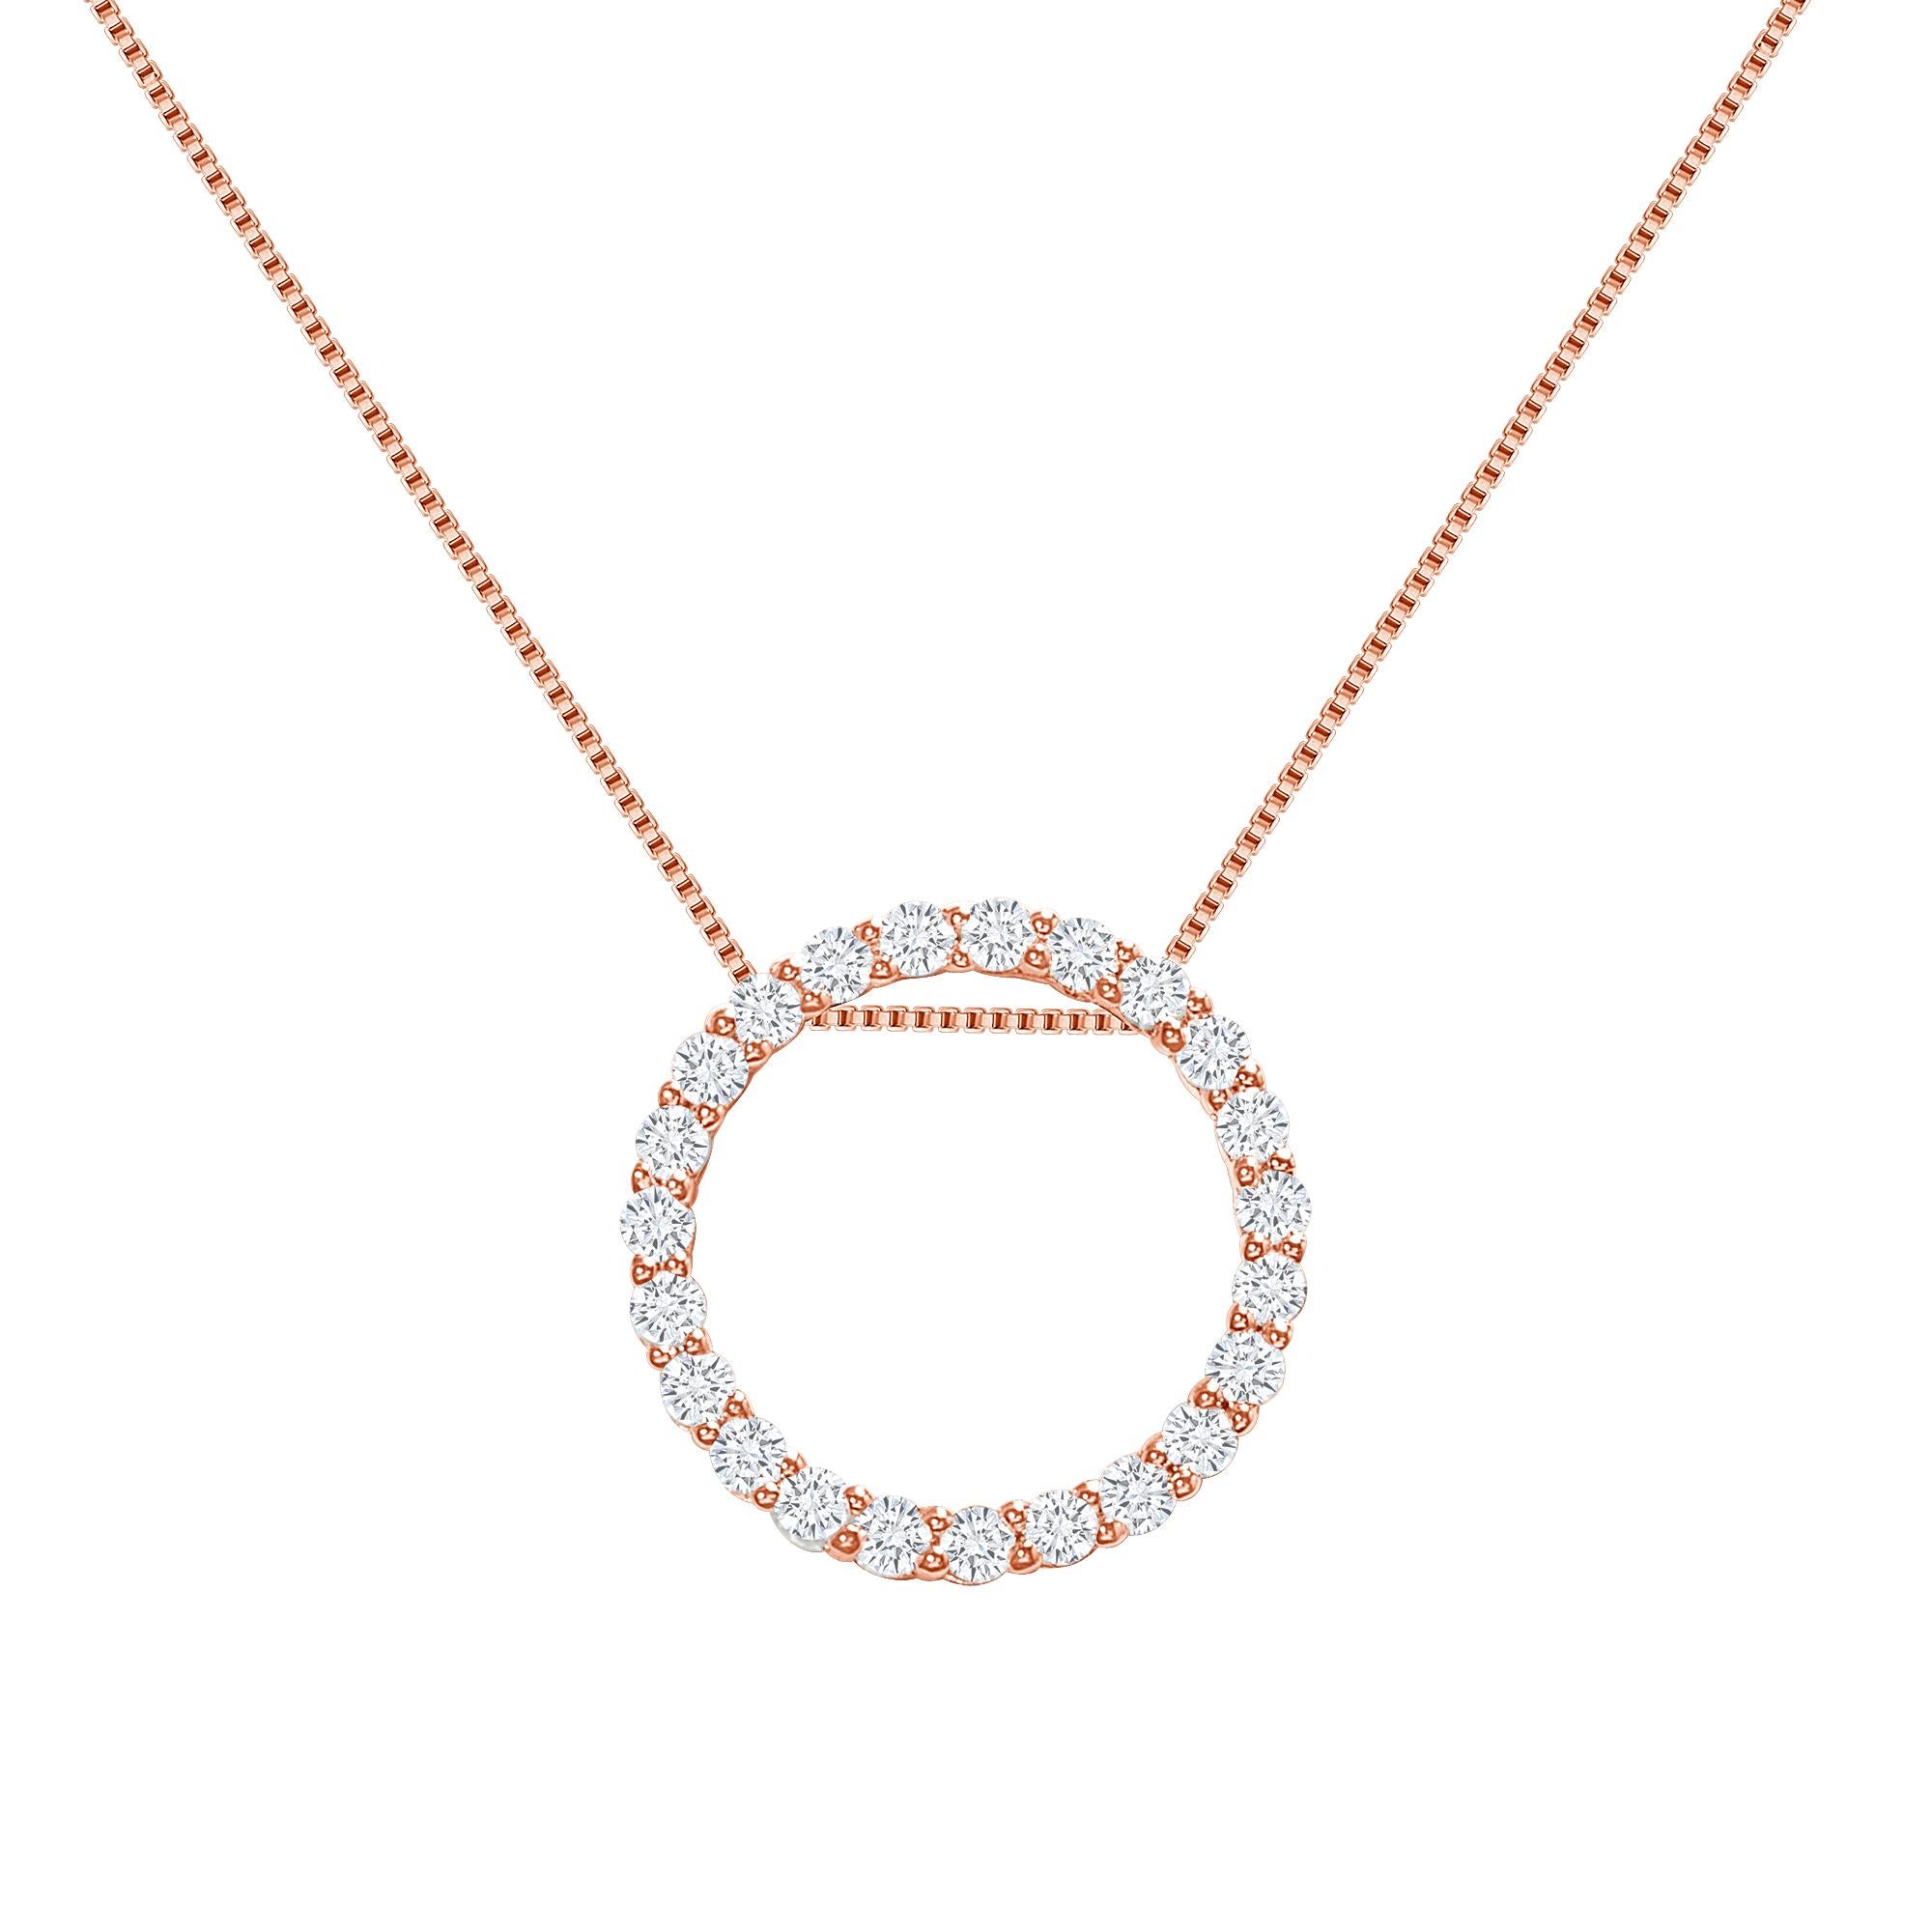 This diamond circle pendant provides a glowing chic look.
Metal: 14k Gold
Diamond Total Carats: 3 carat
Diamond Cut: Round Natural Diamonds (Not Lab Grown)
Diamond Clarity: VS
Diamond Color: F-G
Color: Rose Gold
Necklace Length: 18 inches